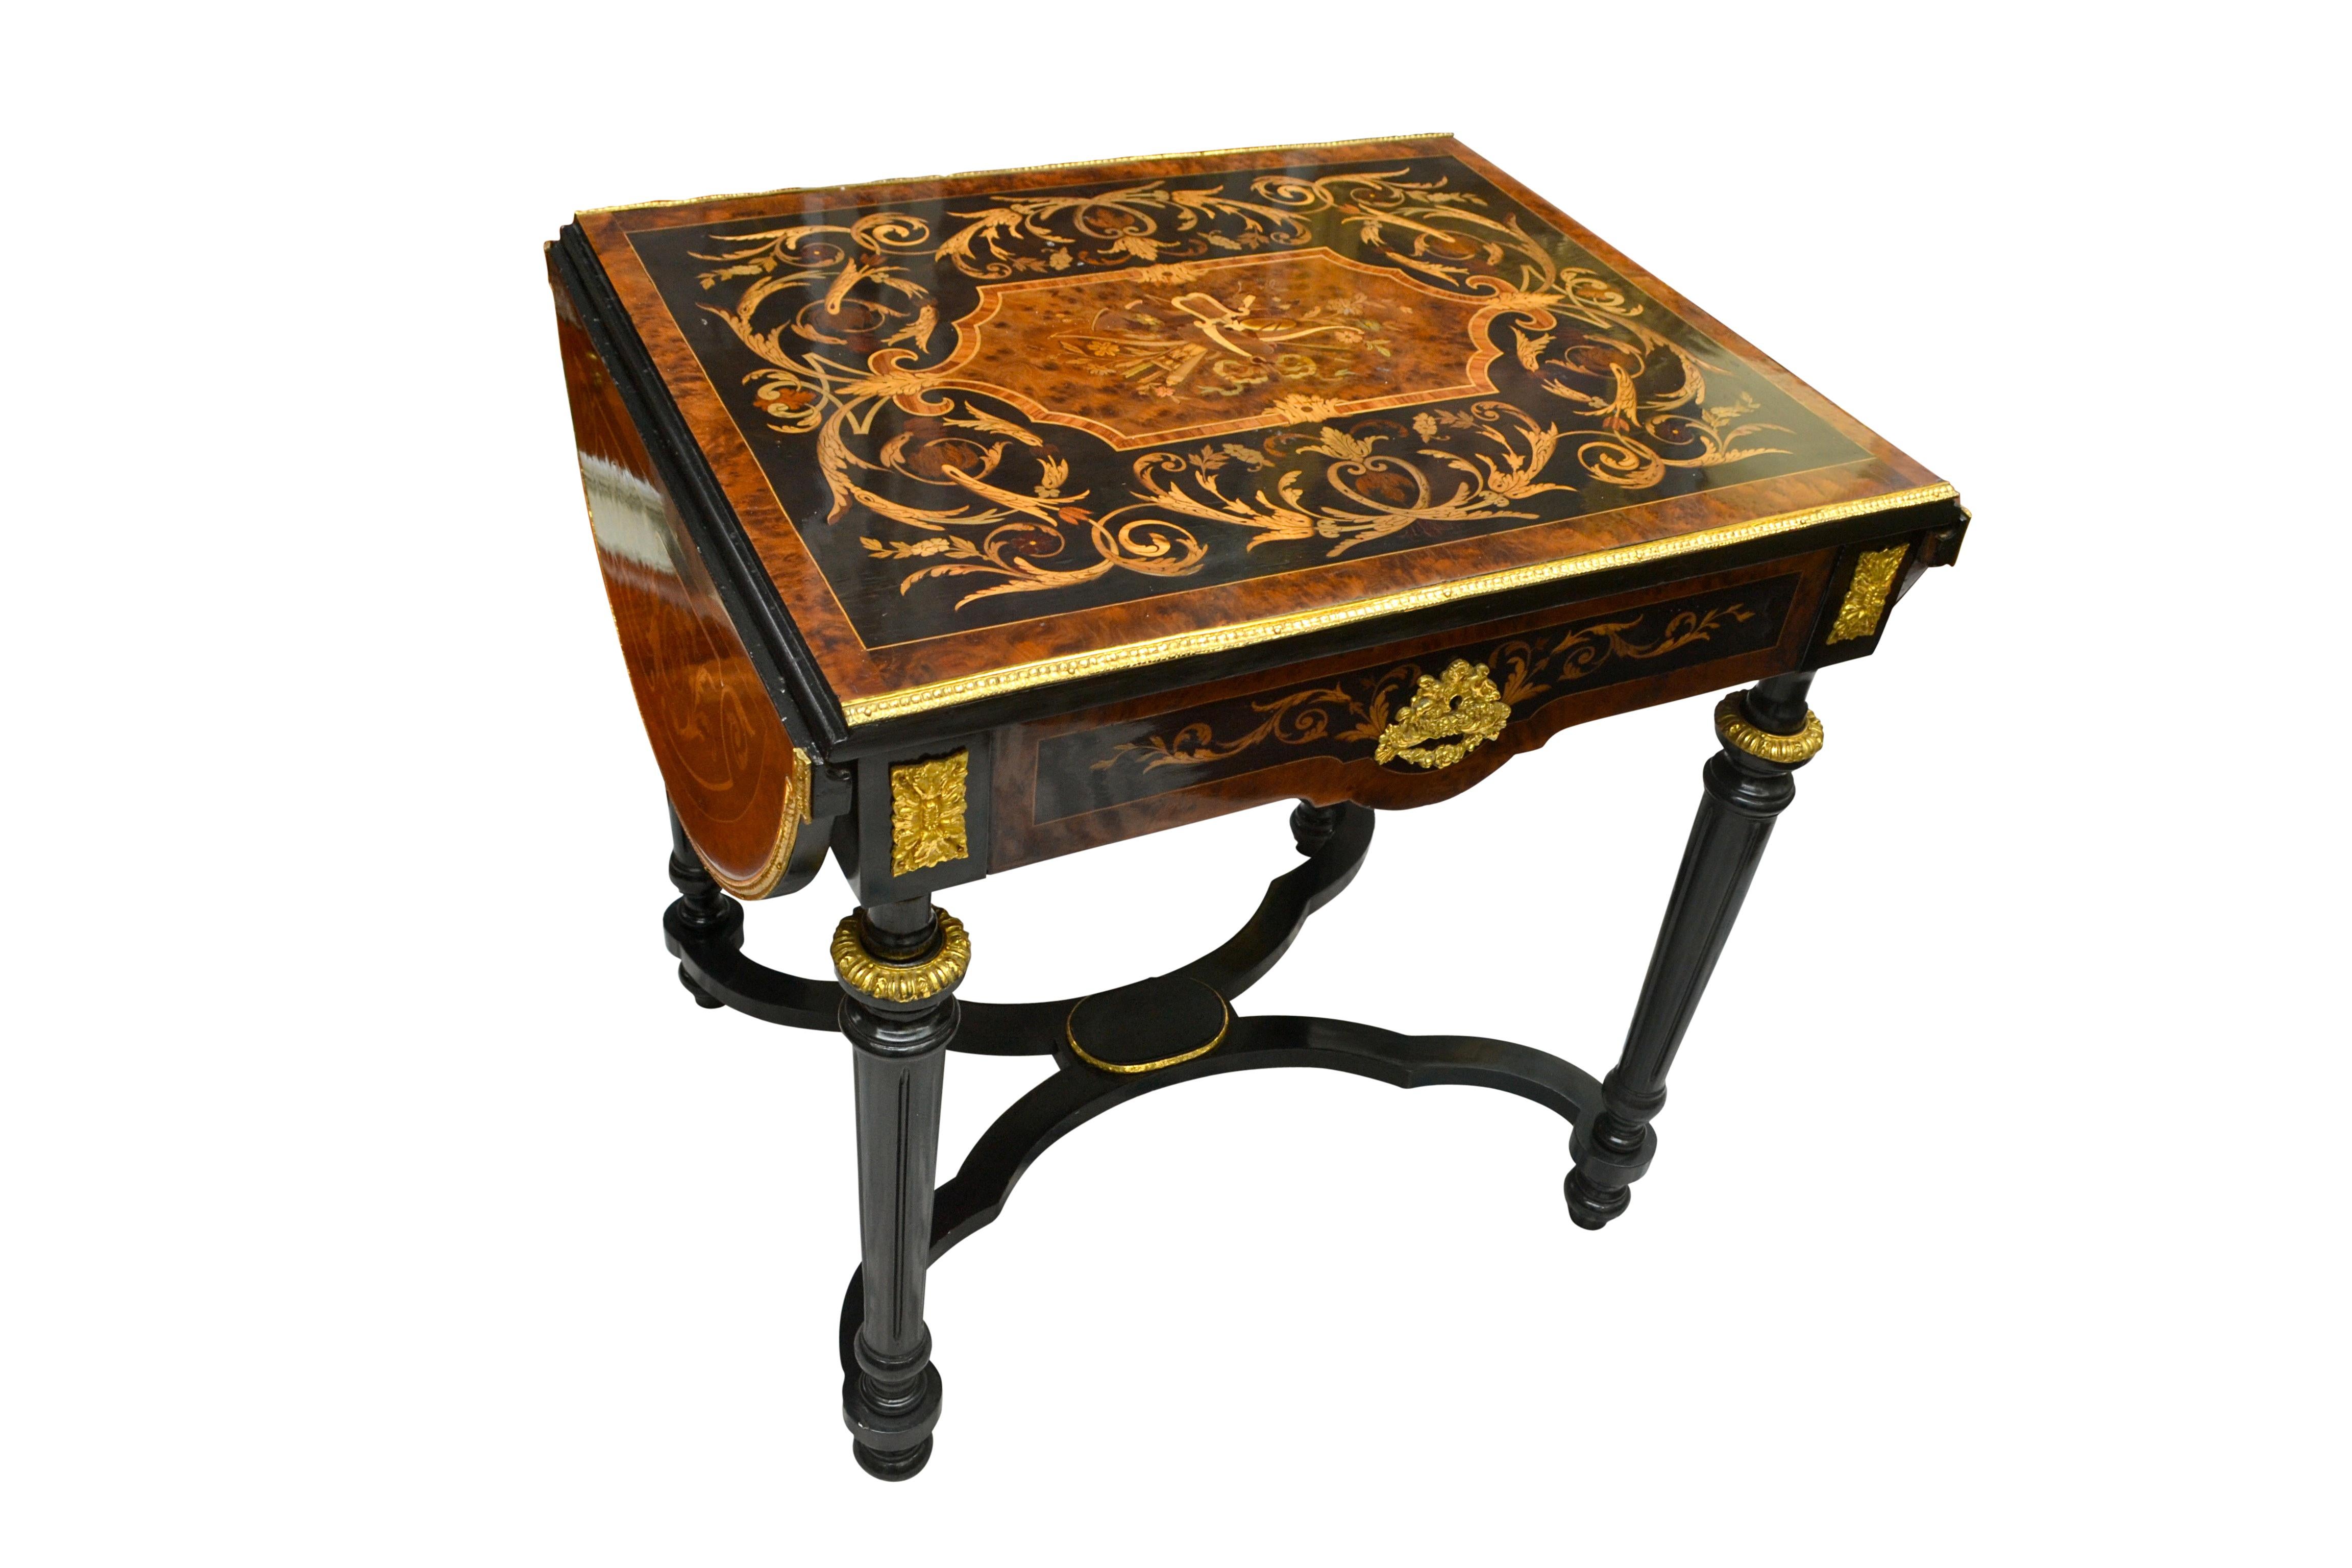 A beautifully inlaid and ebonized French centre table from the Napoleon III Era or third quarter of the 19th century. The table rests on four turned ebonized legs joined at the bottom with a cross stretcher. The exedra shaped top is decorated in